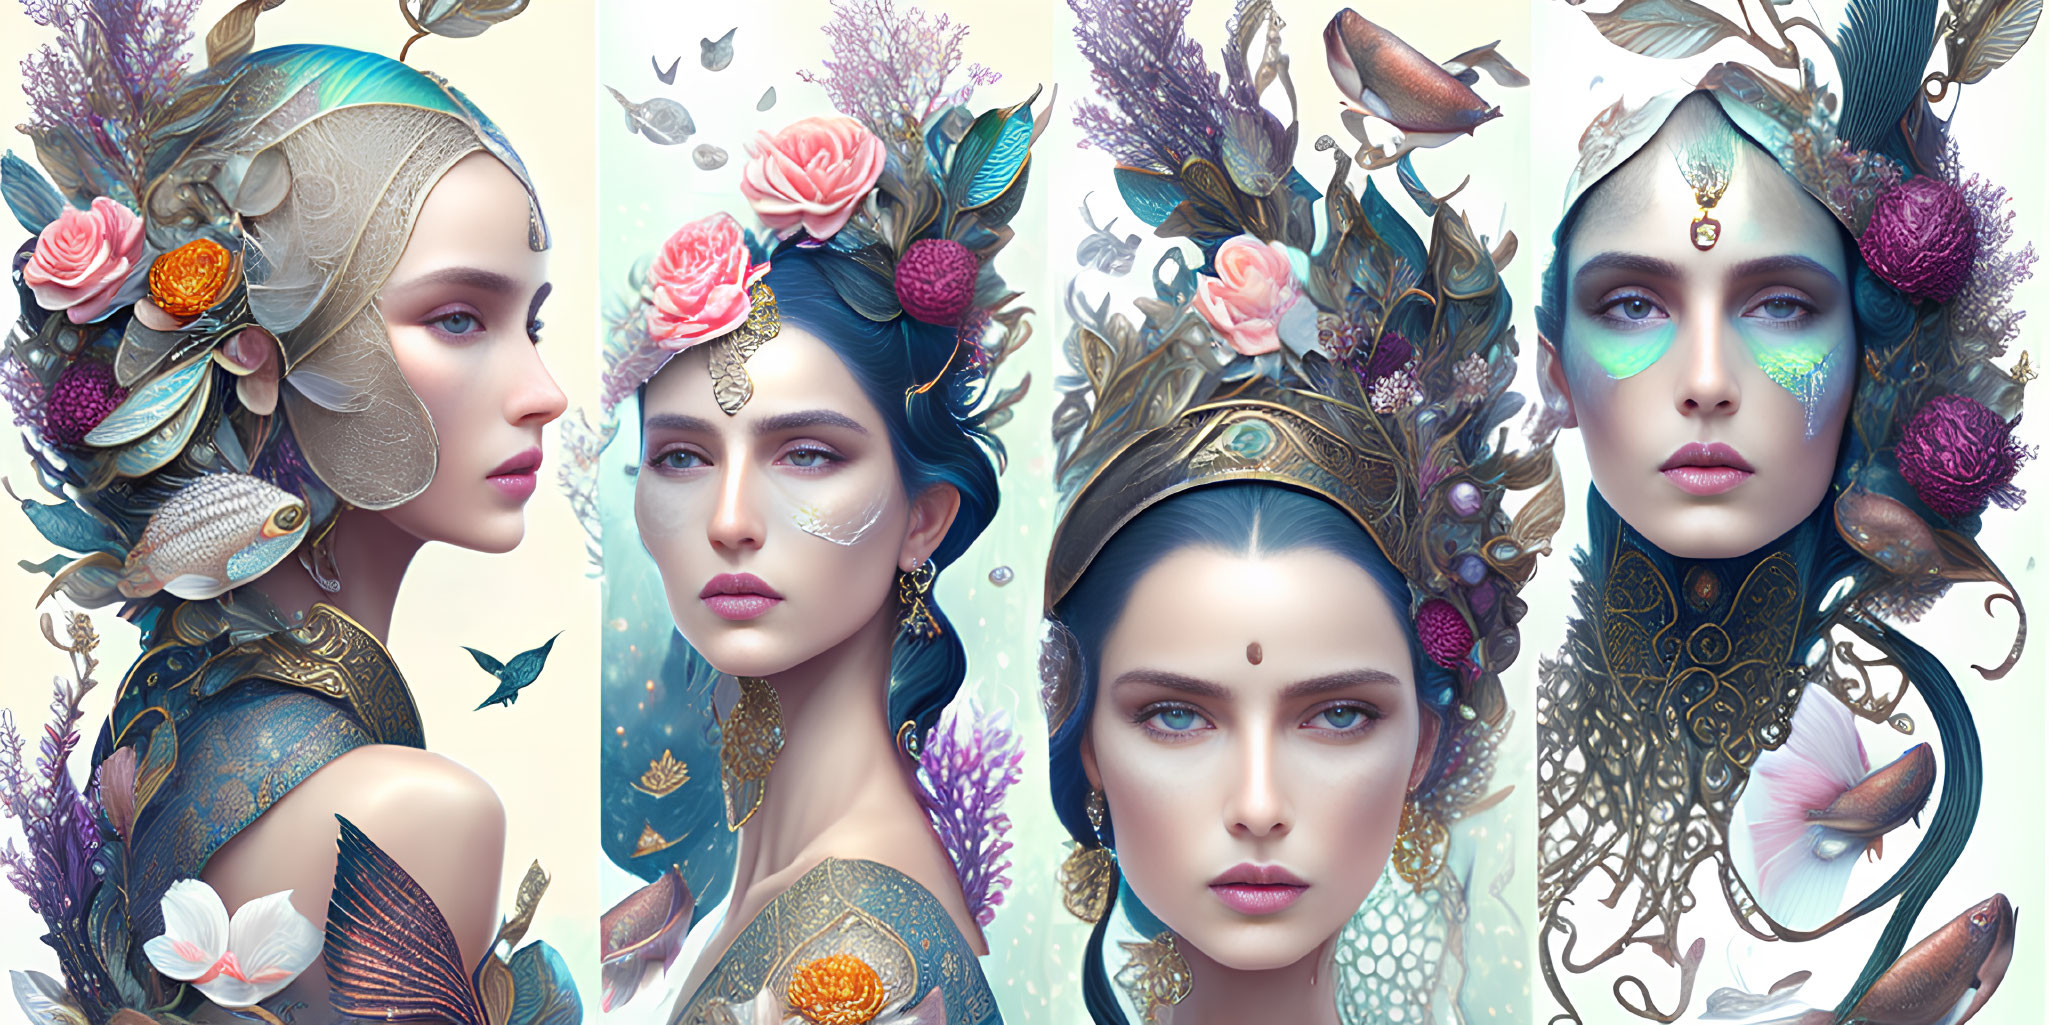 Fantasy headpiece portraits of a woman with flowers and butterflies.